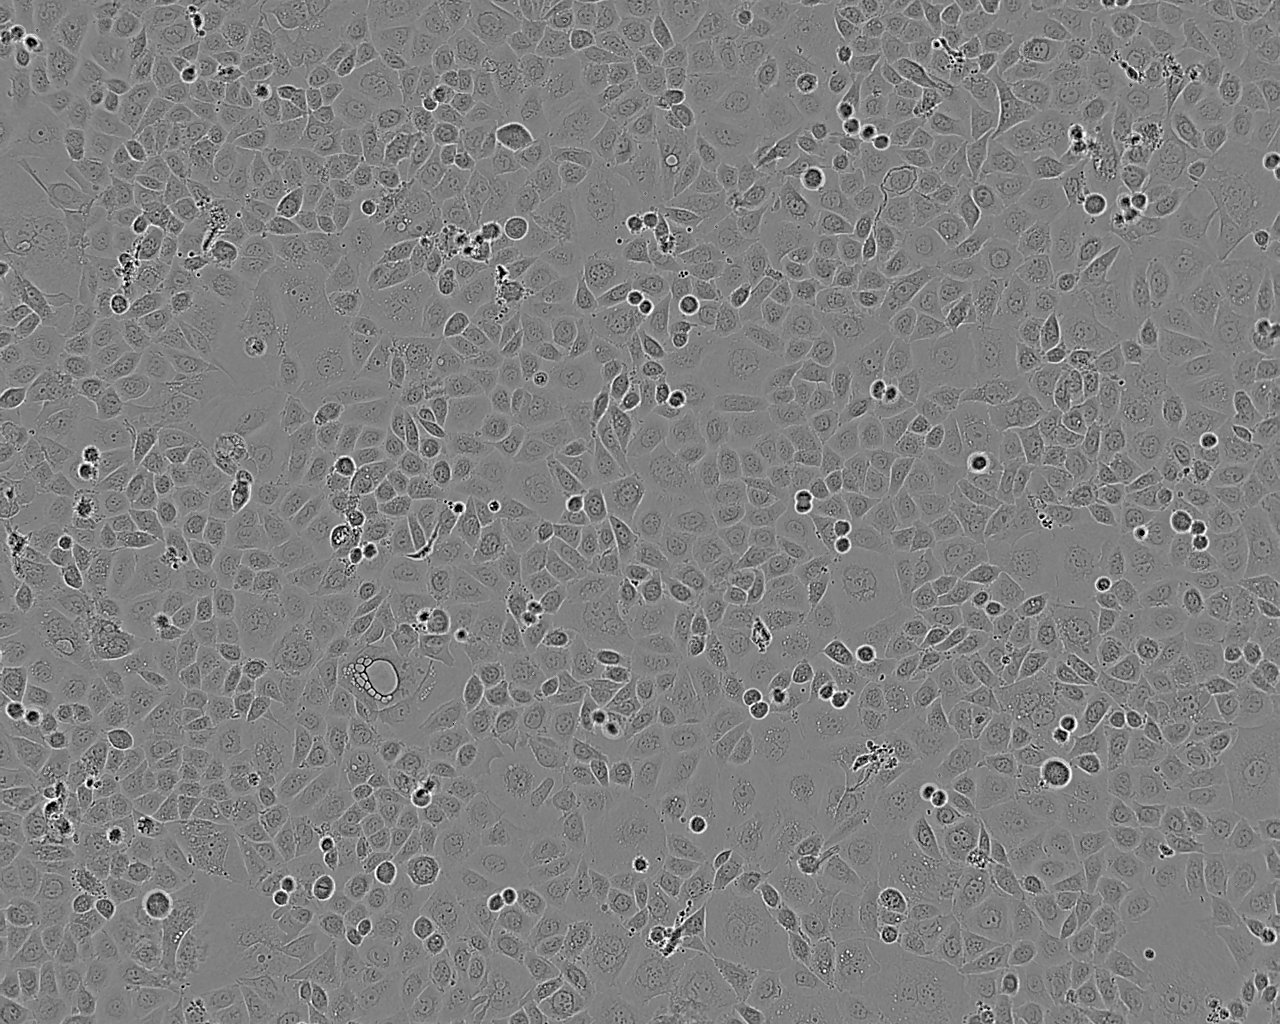 RM-1 epithelioid cells小鼠前列腺癌细胞系,RM-1 epithelioid cells